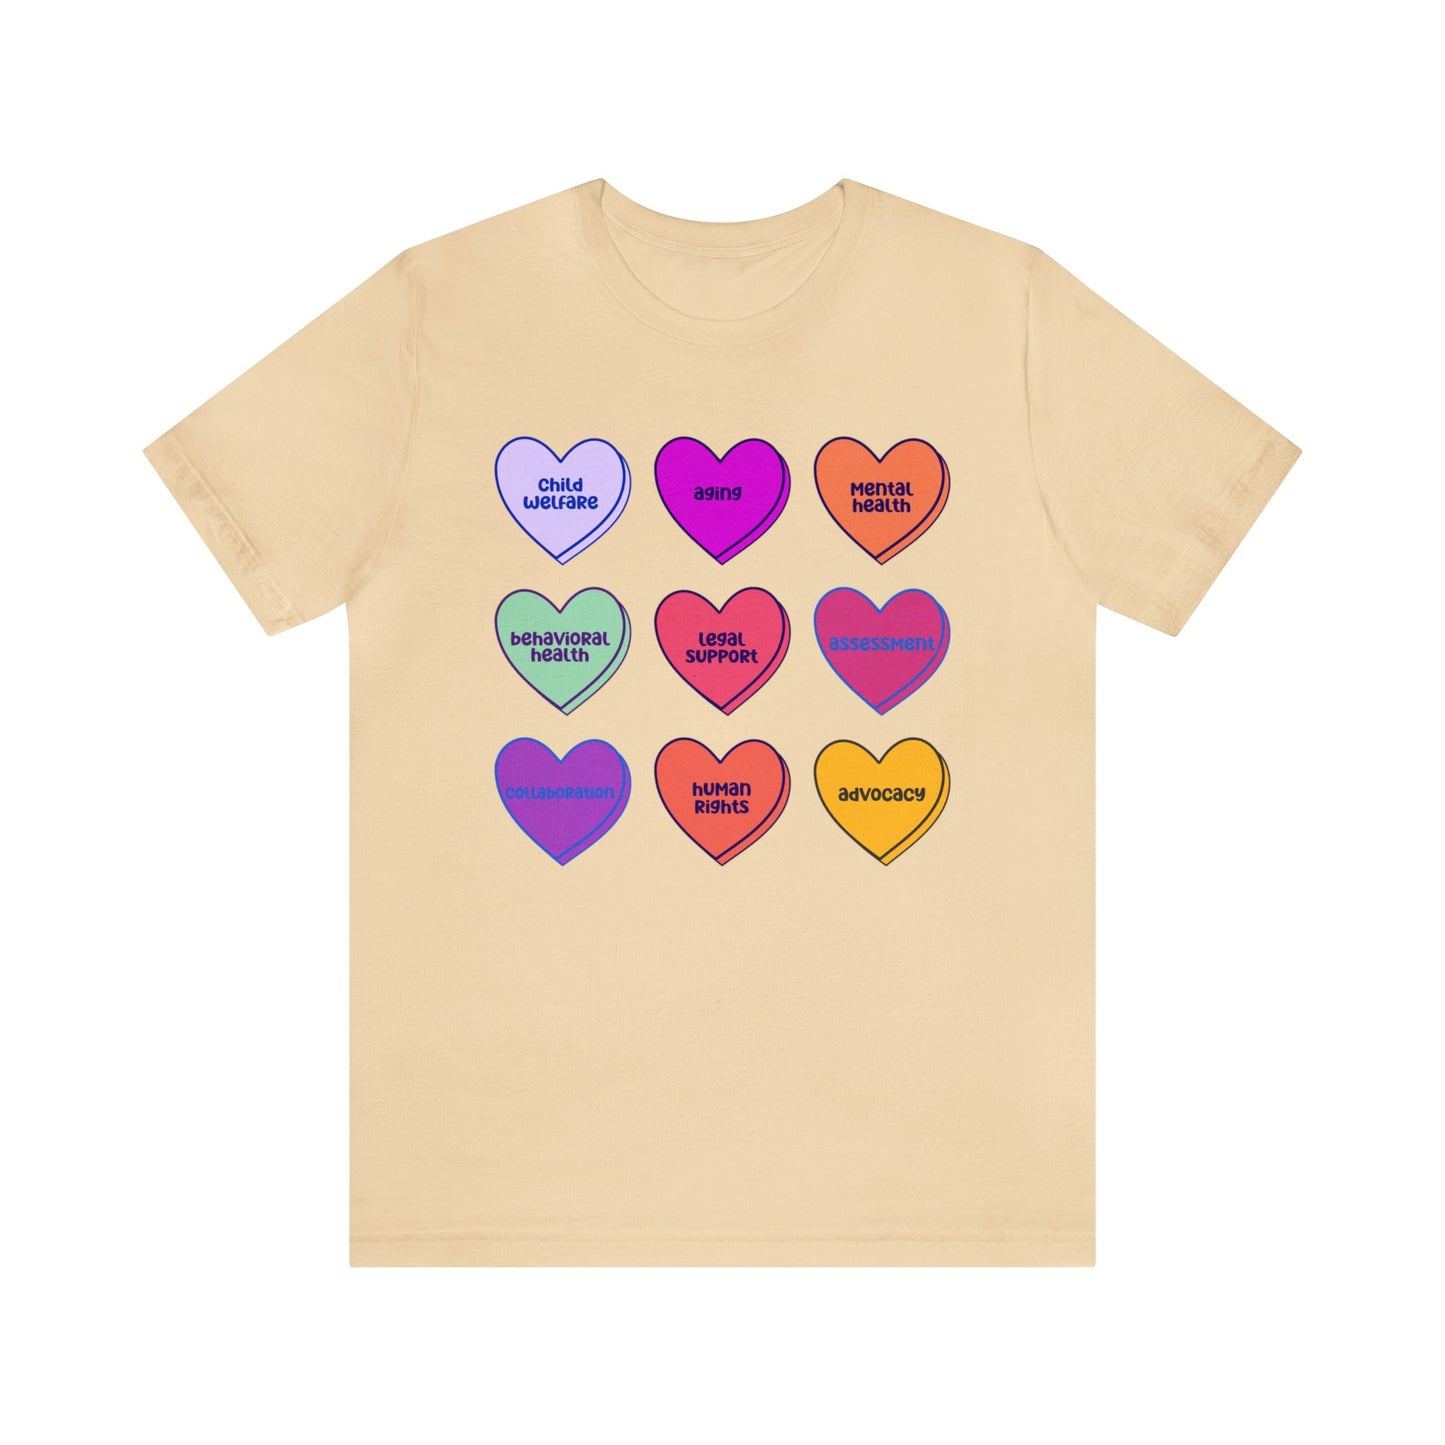 Social Worker Scope of Practice Tee - Valentine Edition